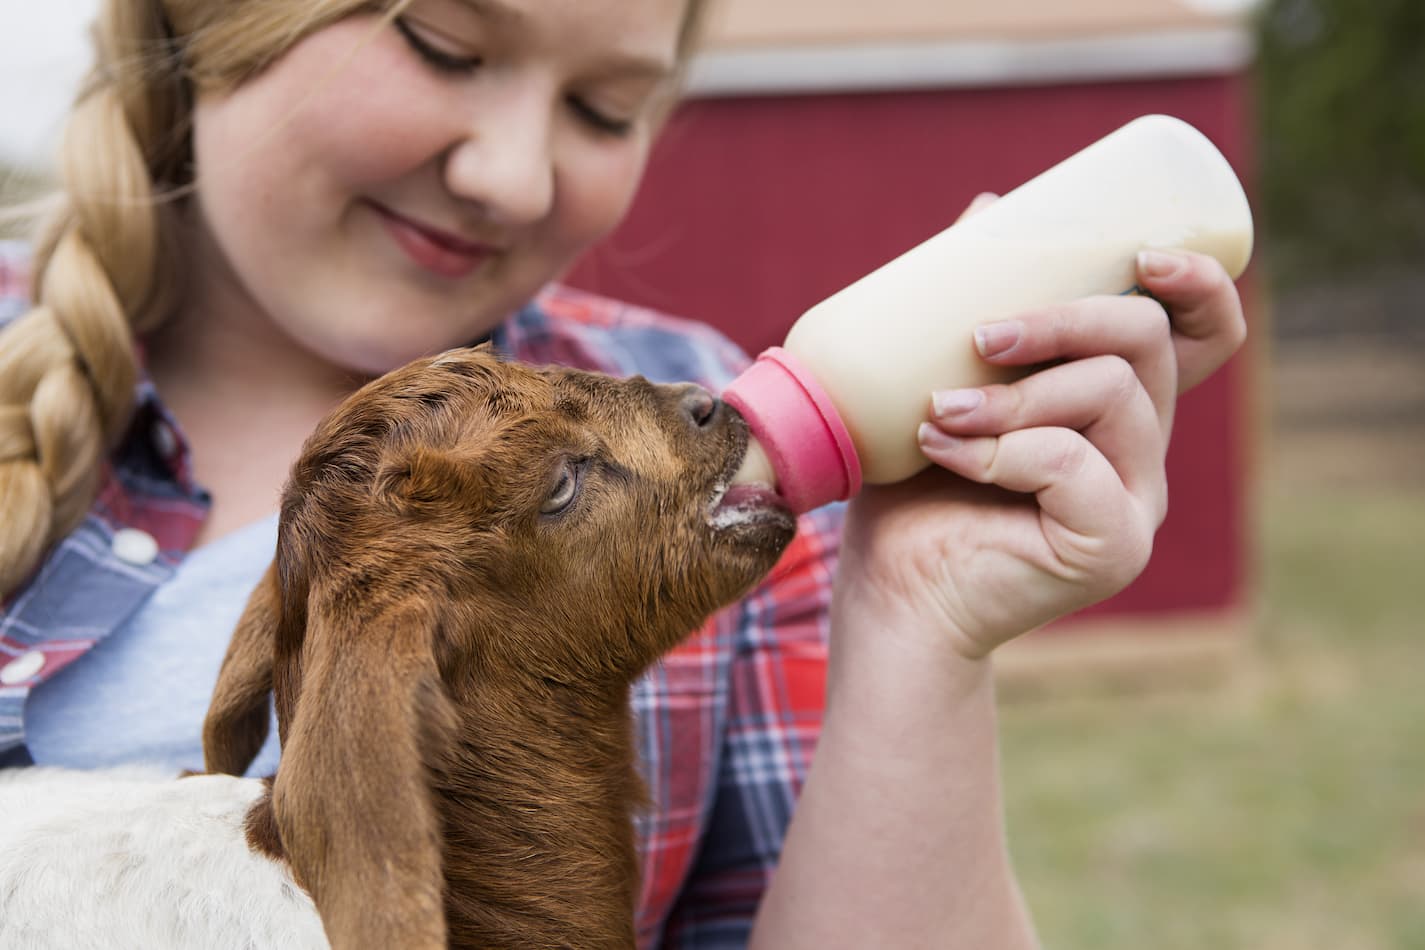 An image of a baby goat drinking milk out of a bottle